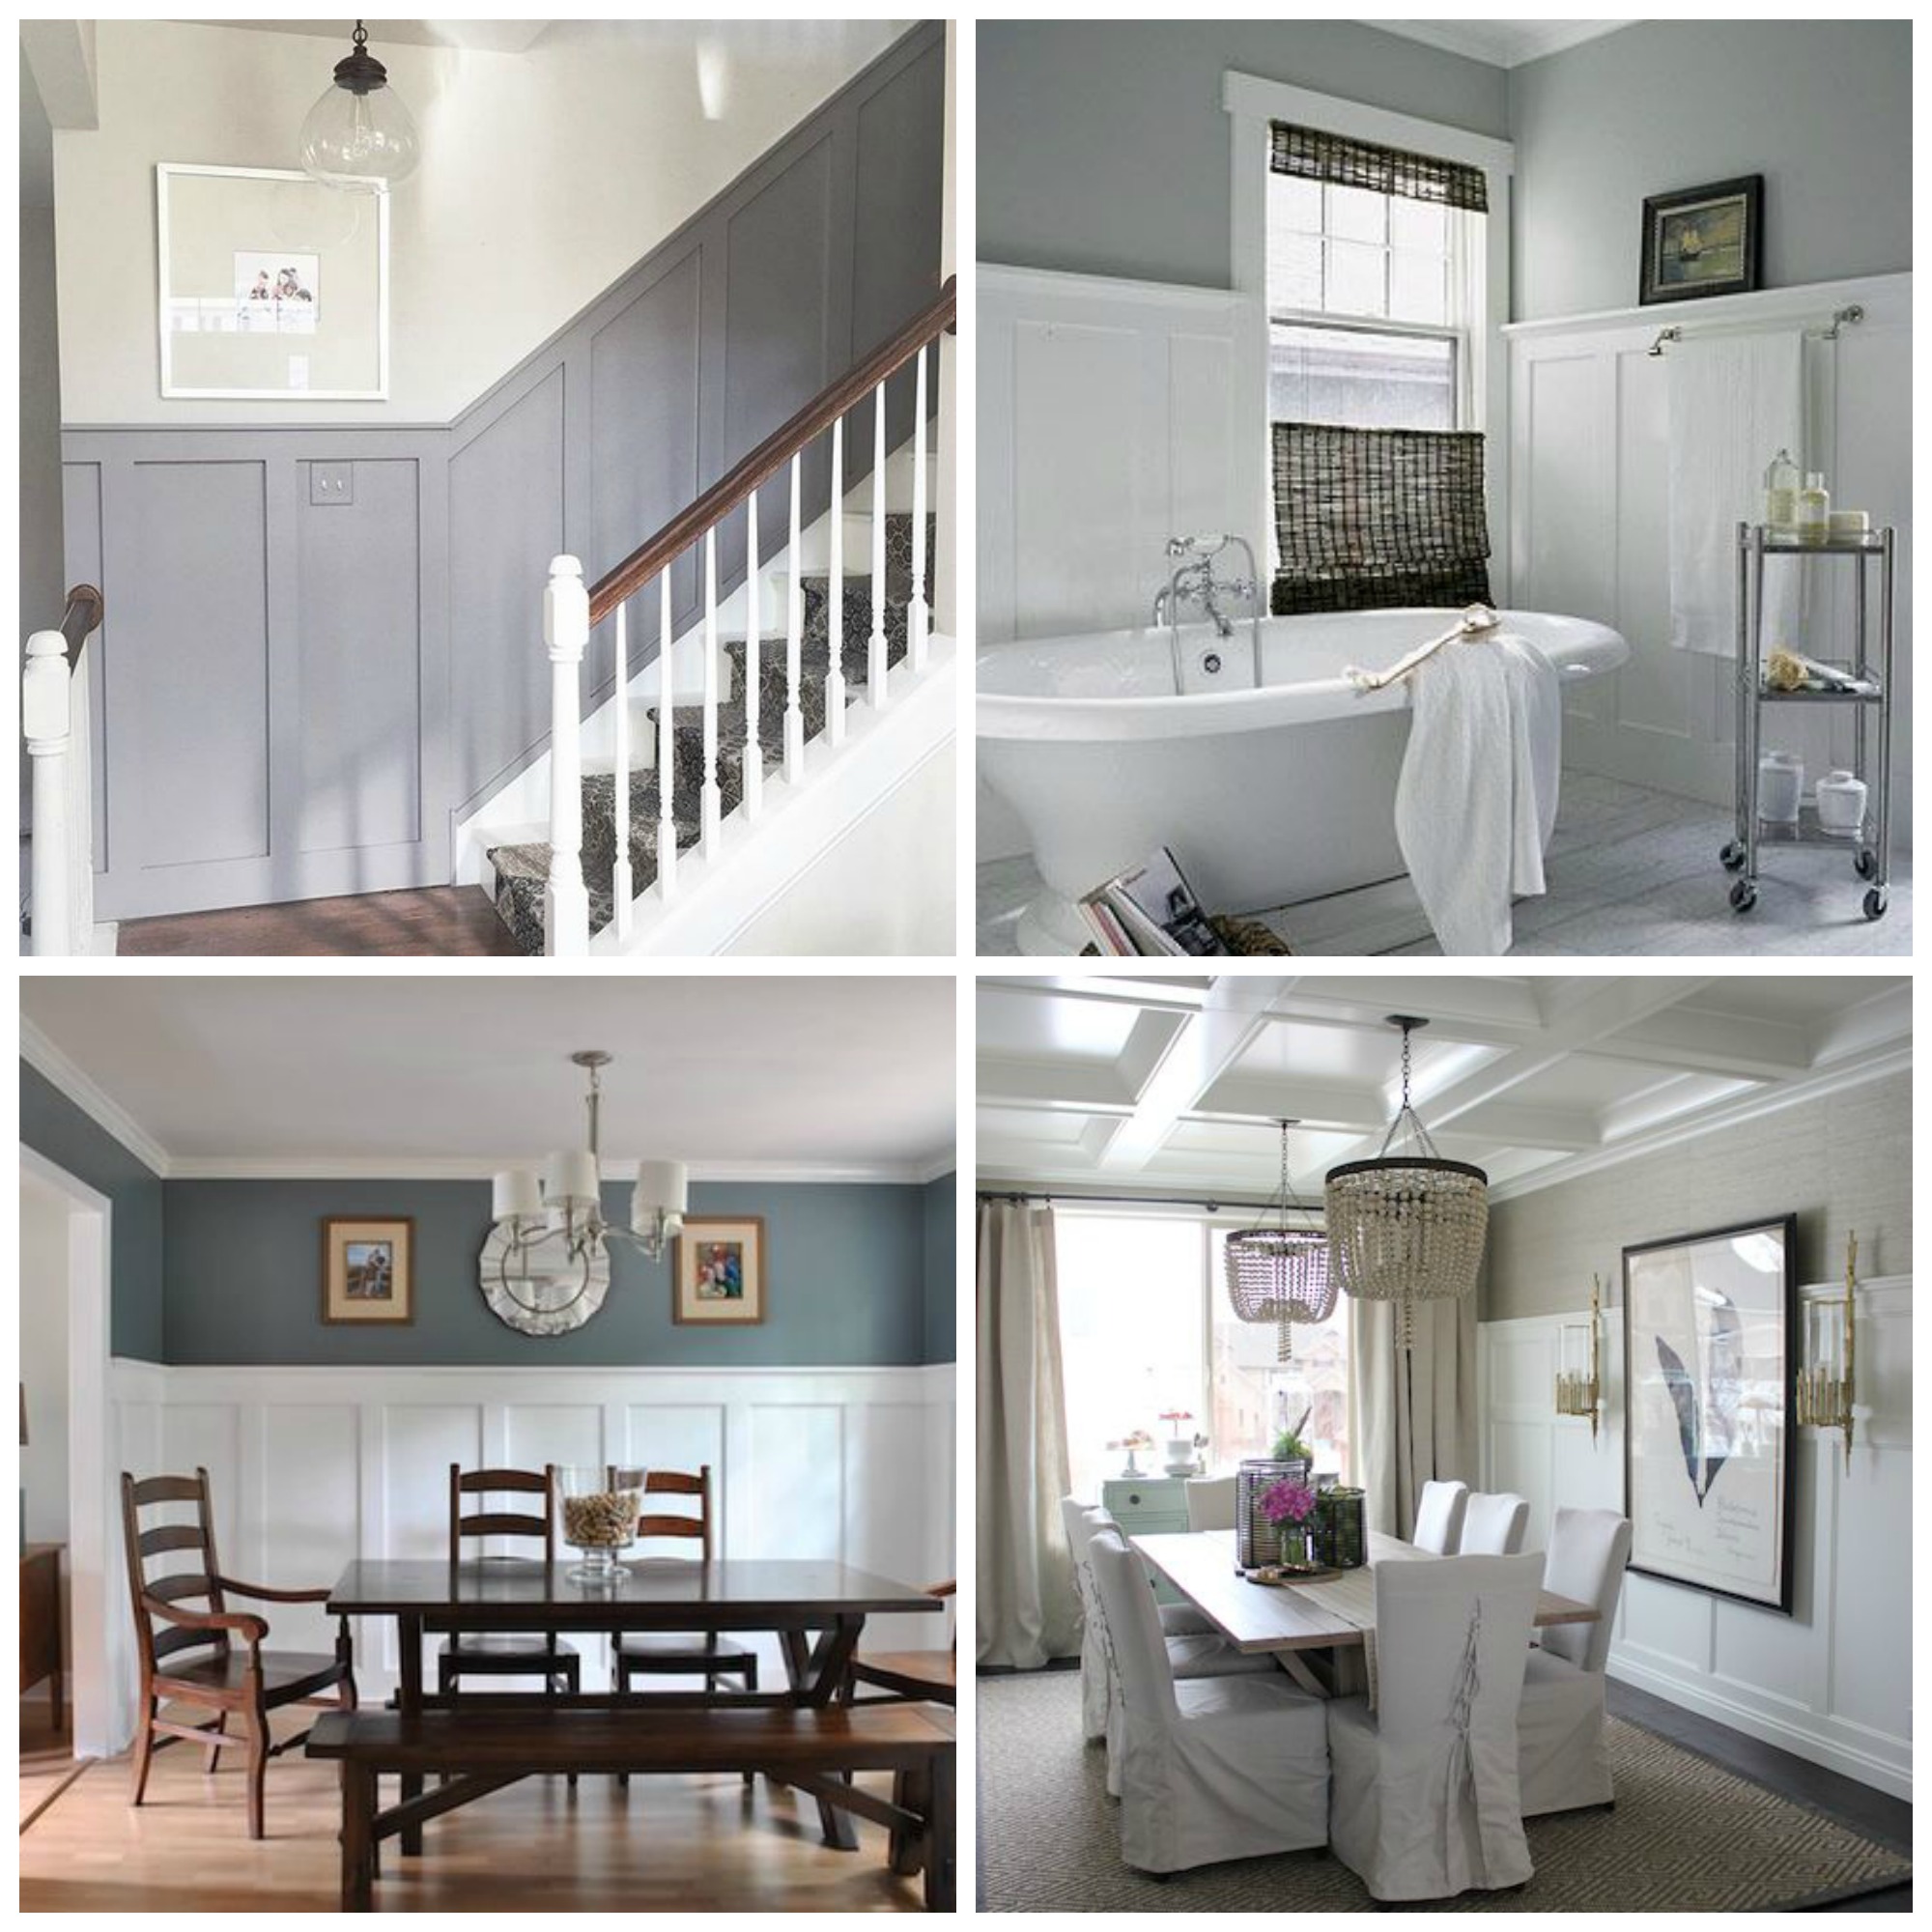 Wainscoting Walls- Where to hang art the DO's and Dont's